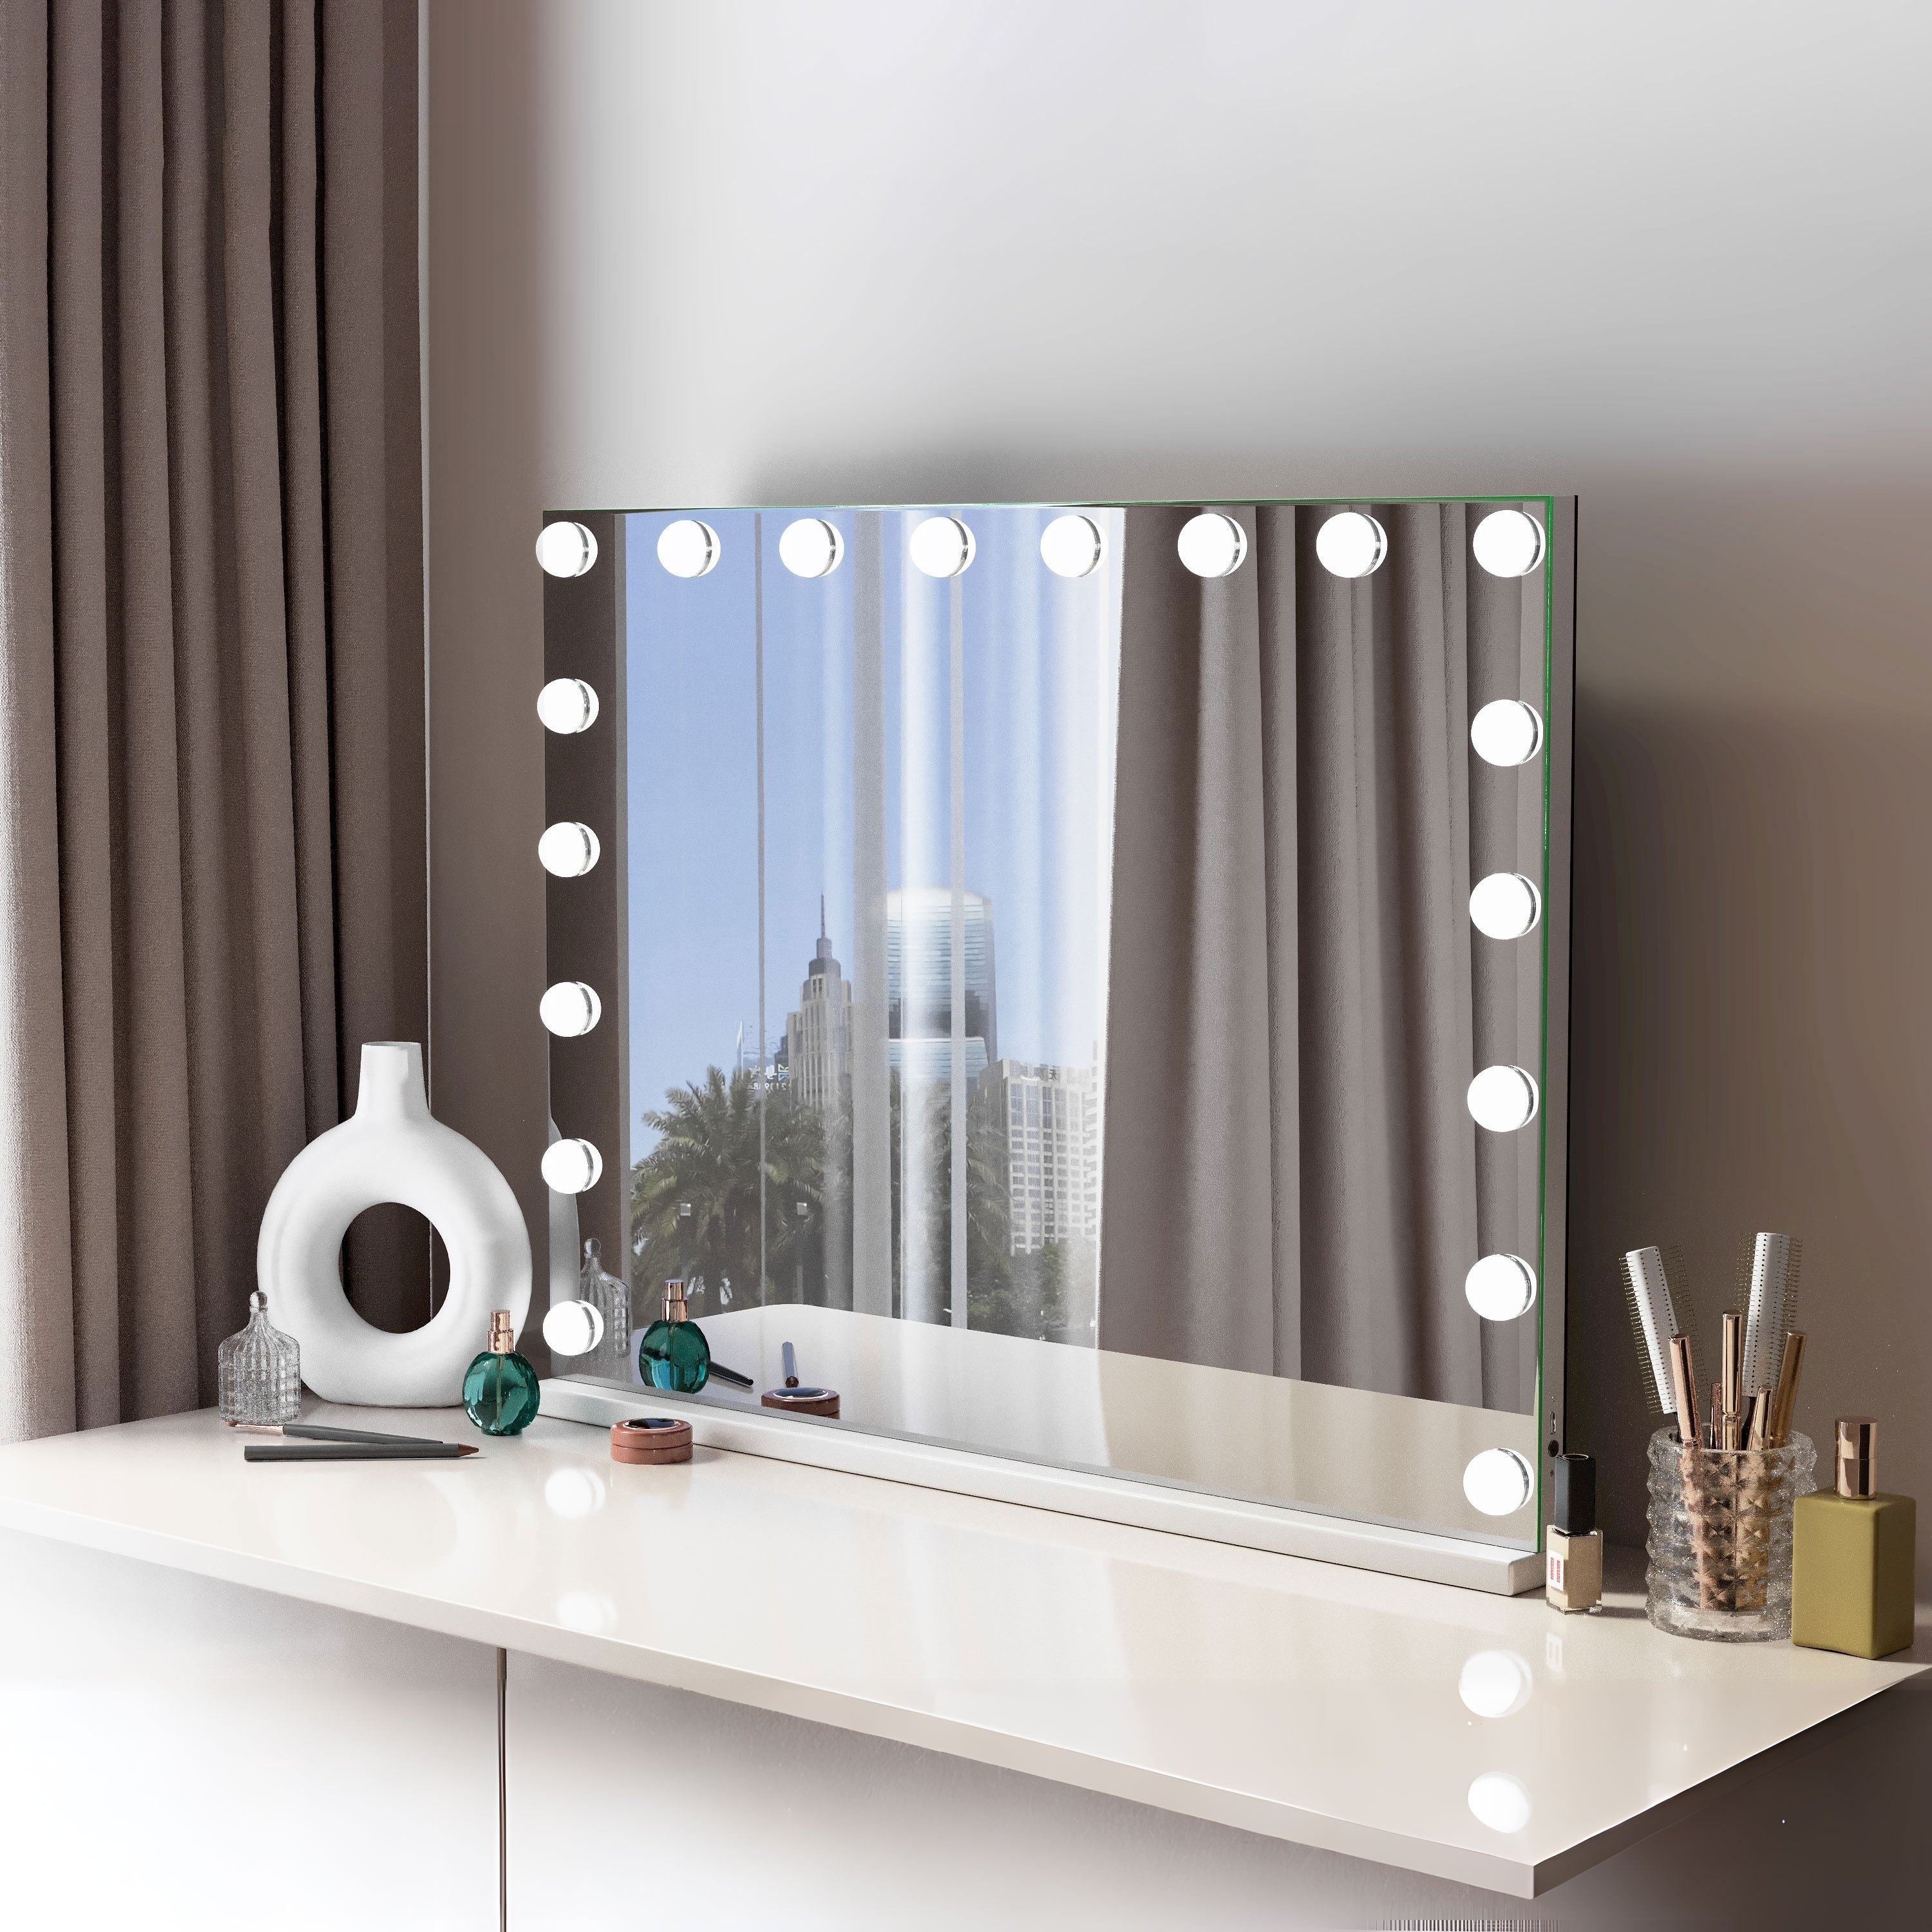 

32''x23'' Makeup Vanity Mirror With Lights, 3 Light Settings, With Usb Charging Port, Tabletop Or Wall Mount, White